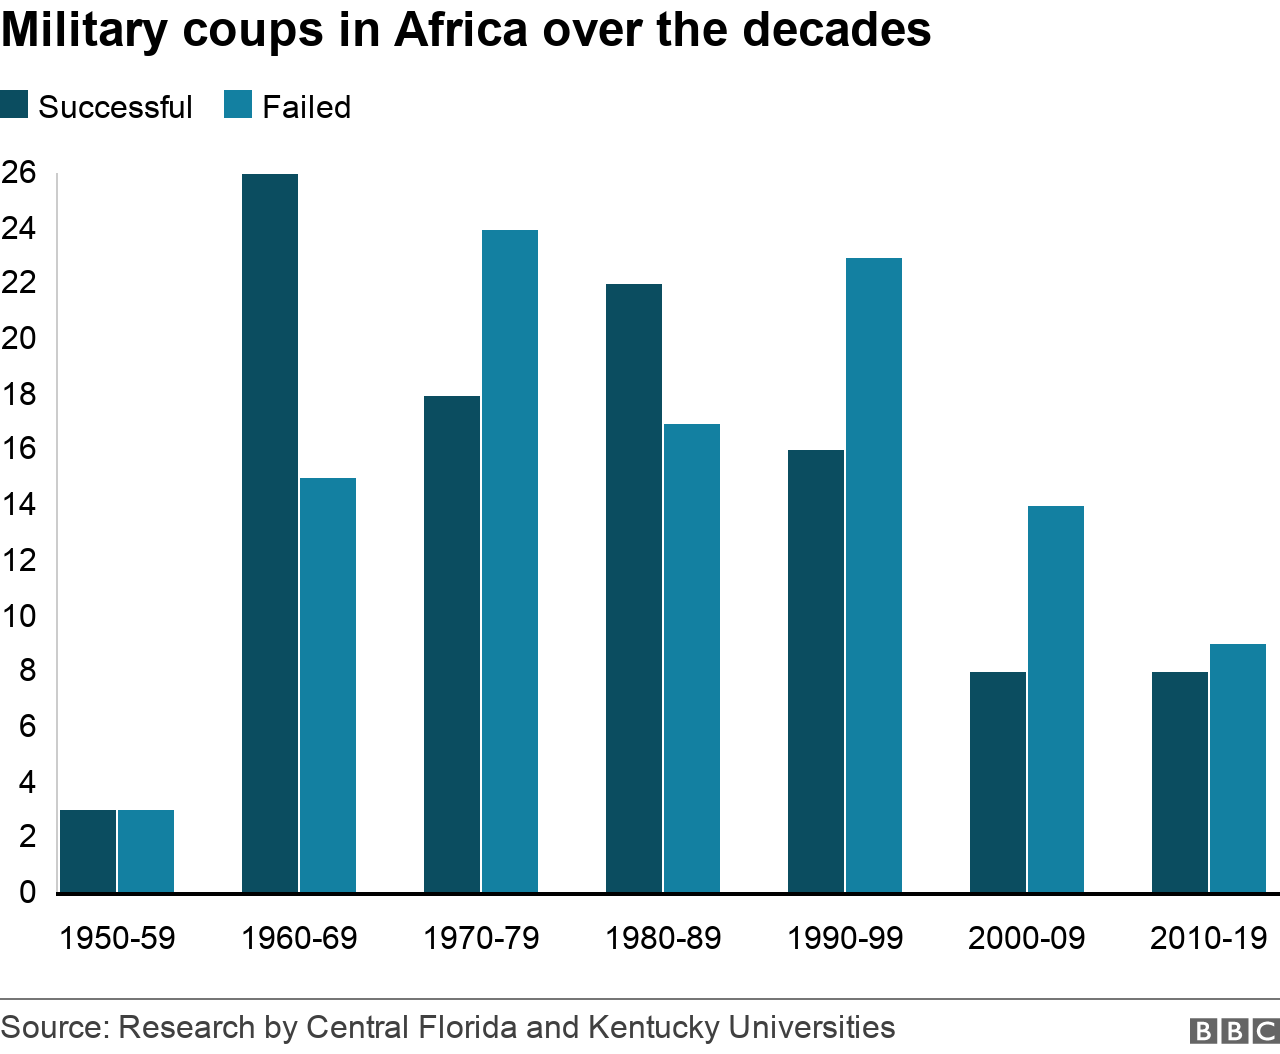 A chart showing successful and failed military coups in Africa